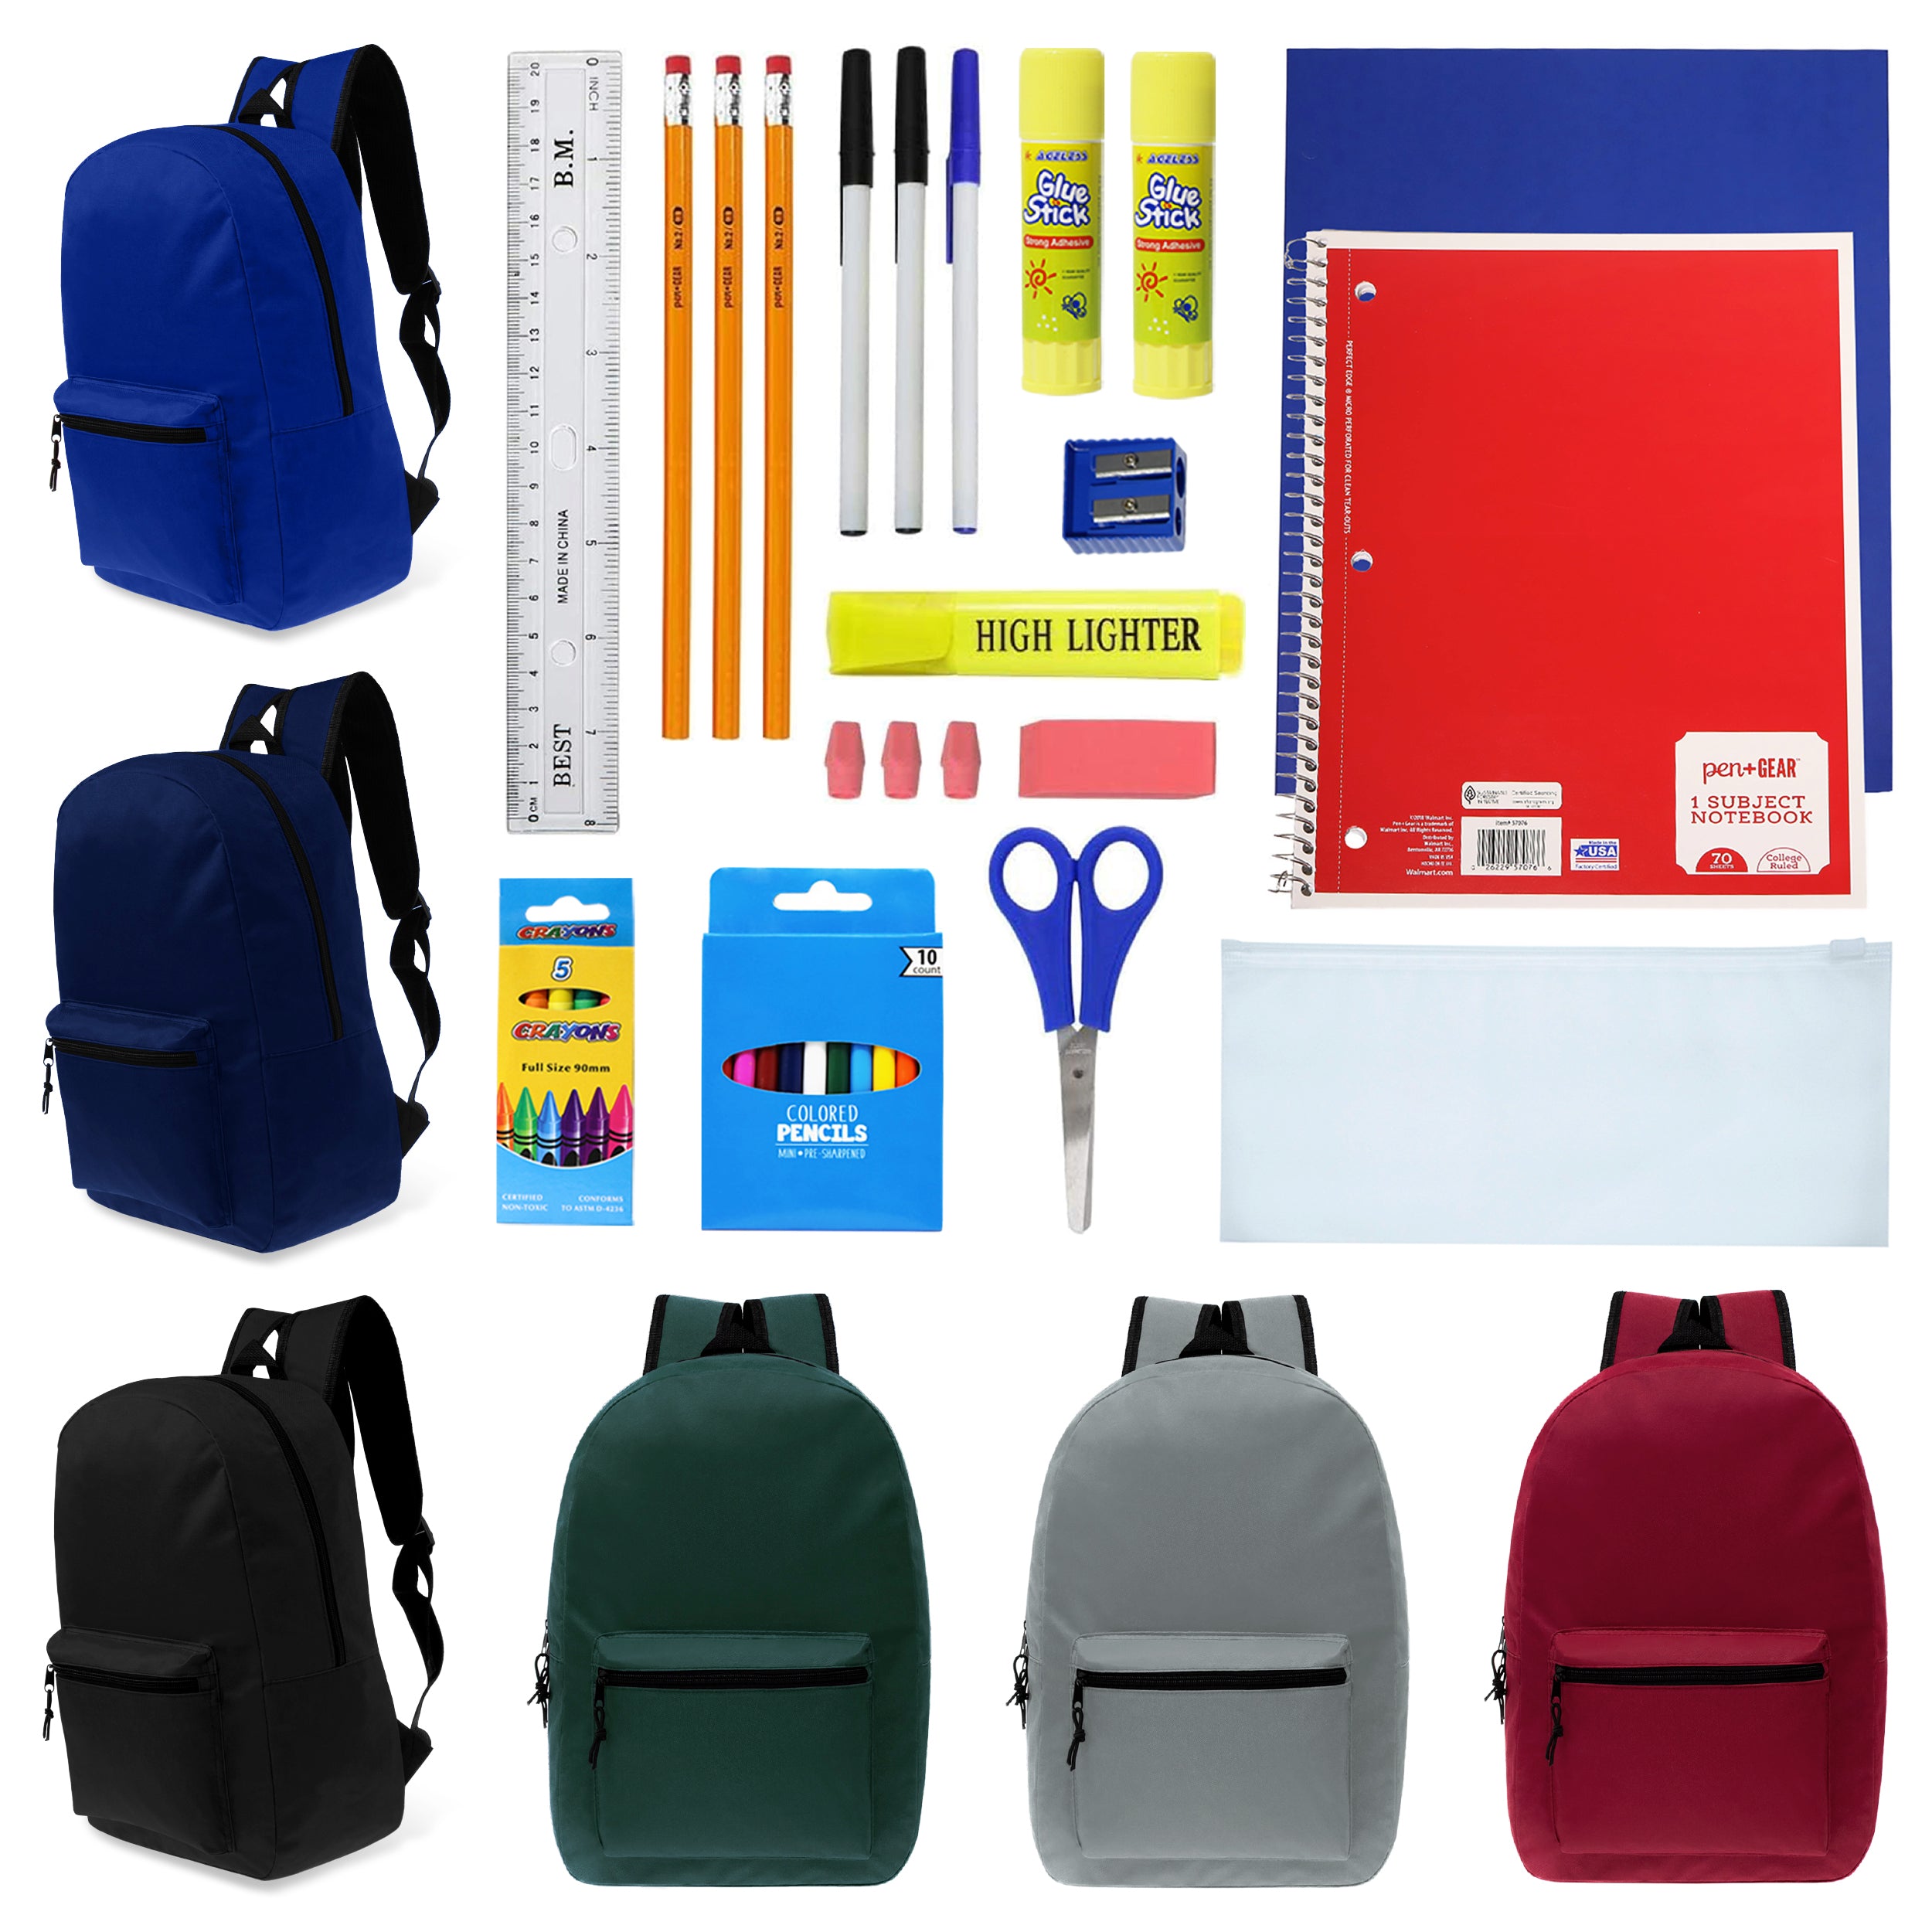 19 Inch Bulk Backpacks in Assorted Colors with School Supply Kits Wholesale - Kit of 12